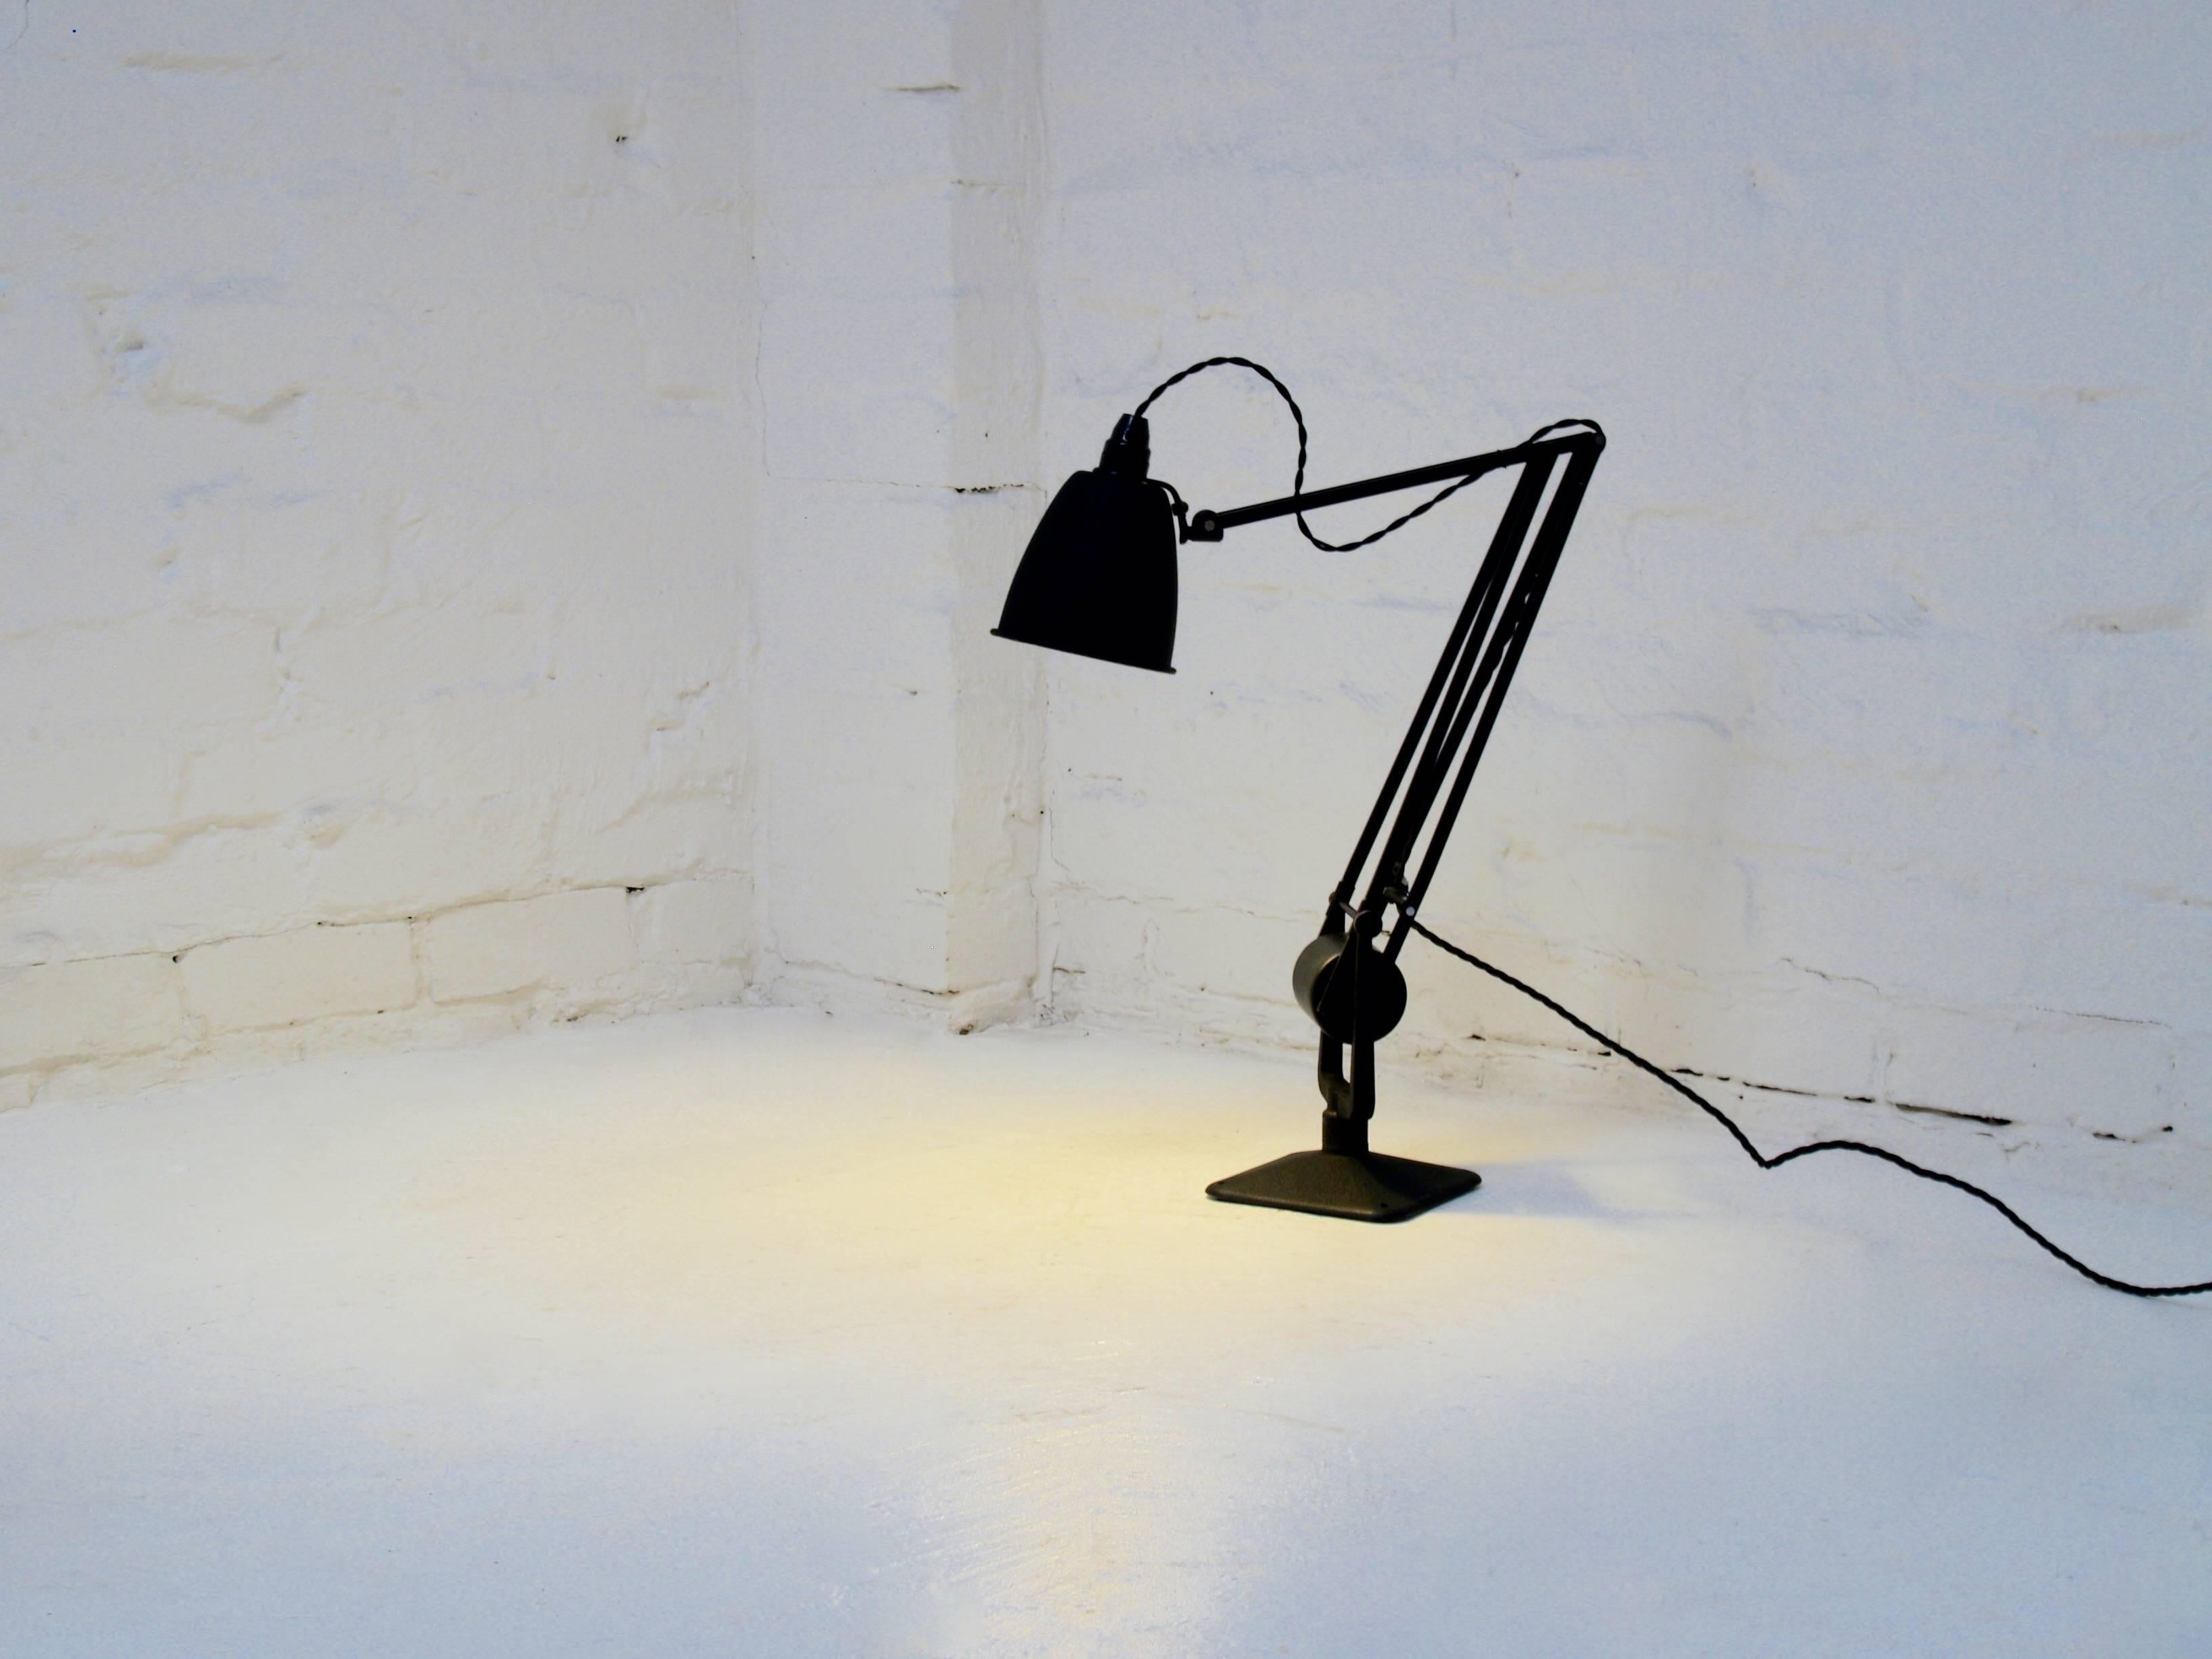 This lovely piece of Mid-Century lighting technology is known as 'The Roller'. It has amazing reach for a lamp of this period because of the unique design of the steel counterbalance, which 'rolls' through the full range of motion giving perfect